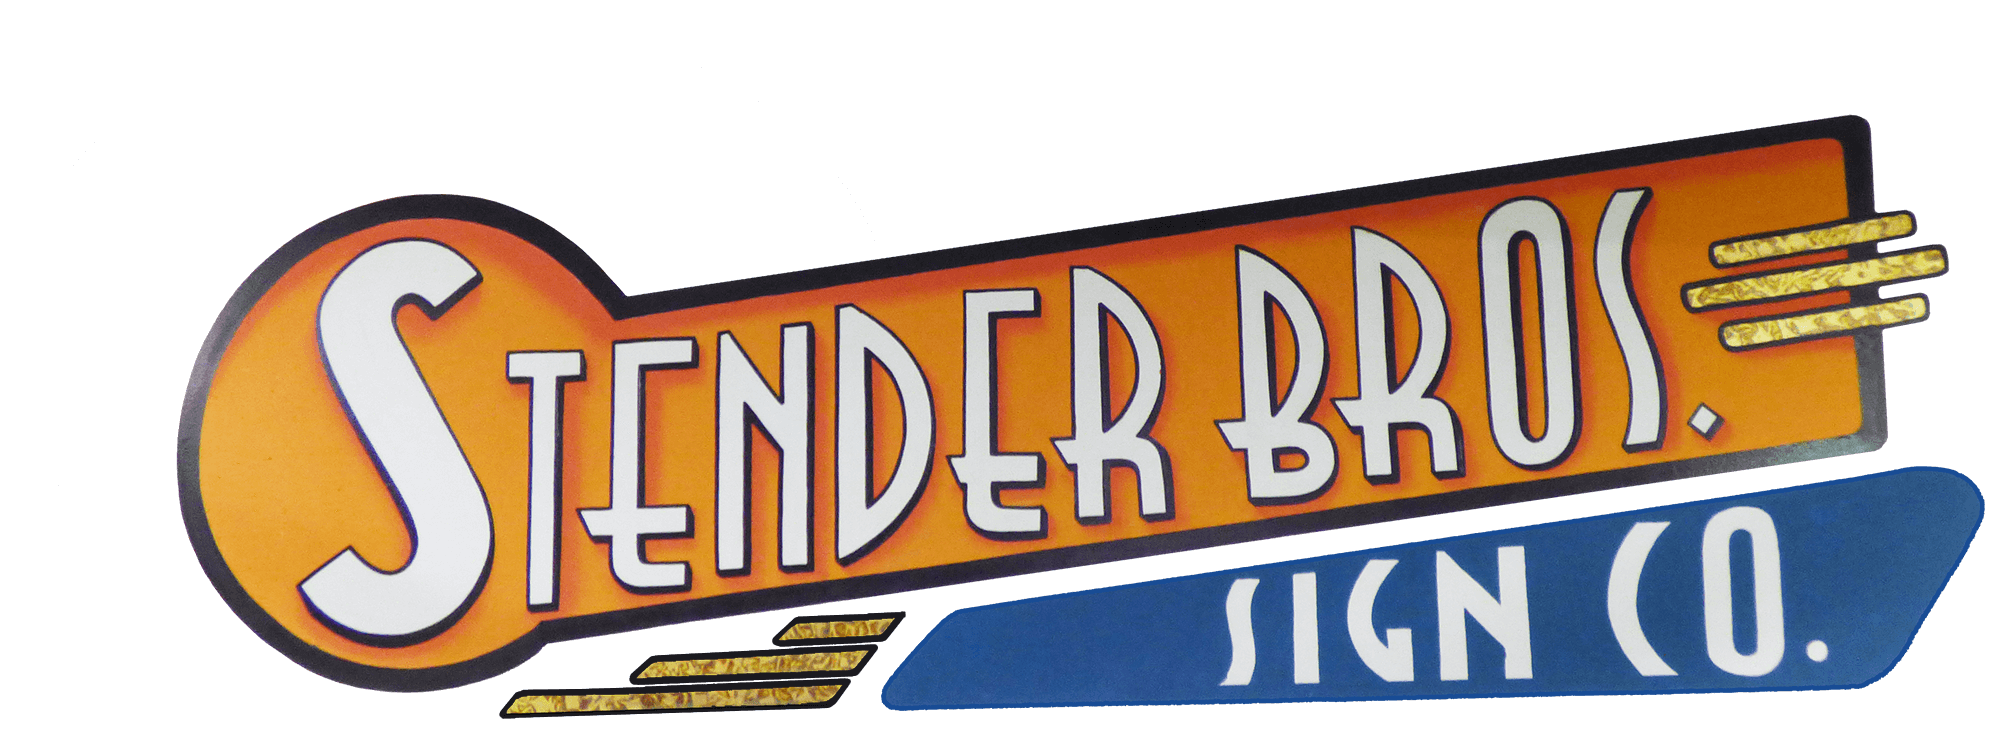 Stender Brothers Sign Co.